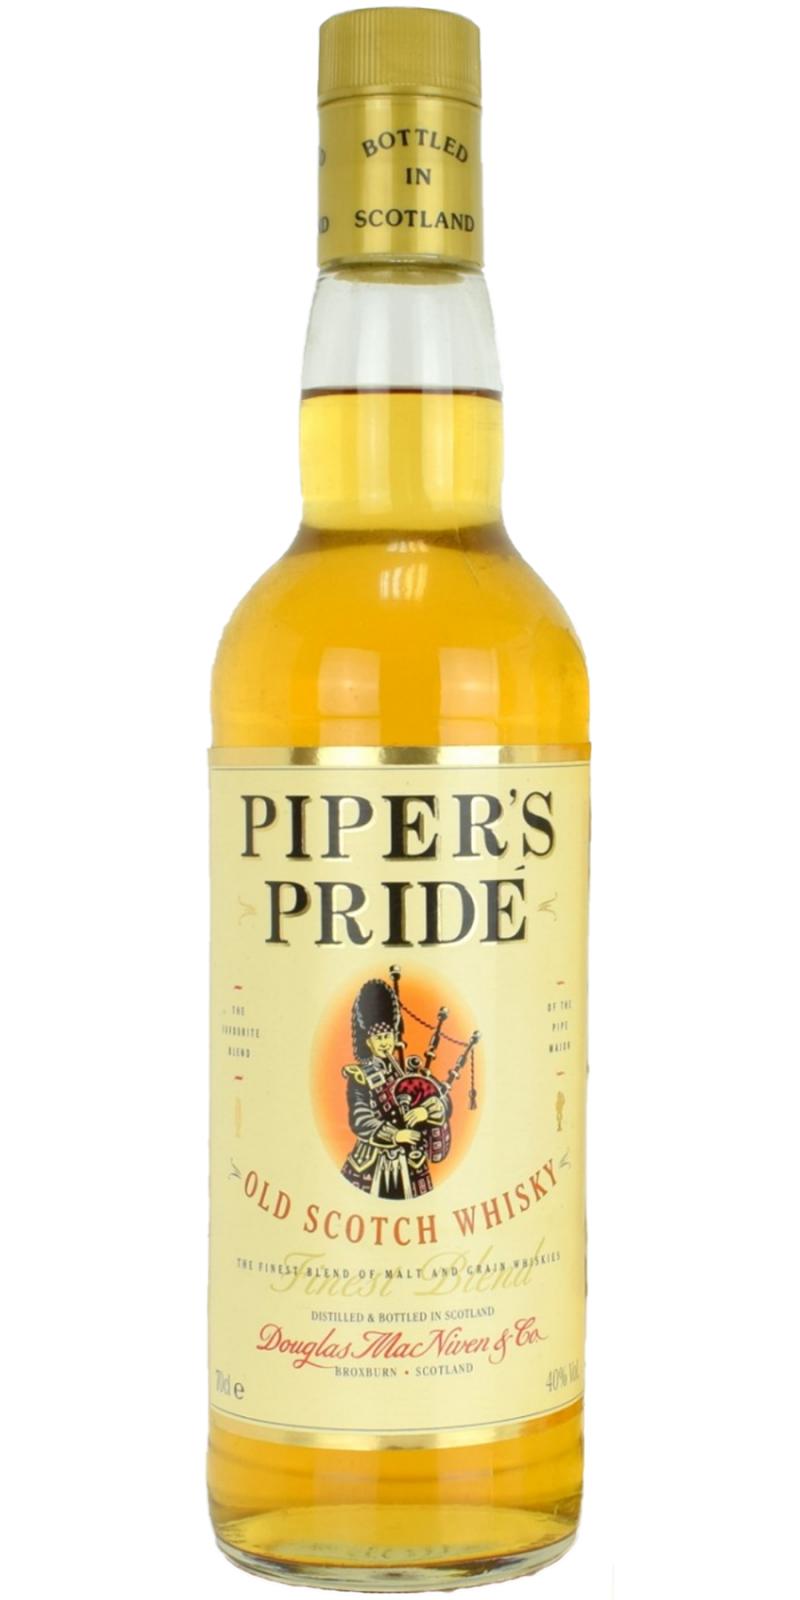 Piper's Pride Old Scotch Whisky